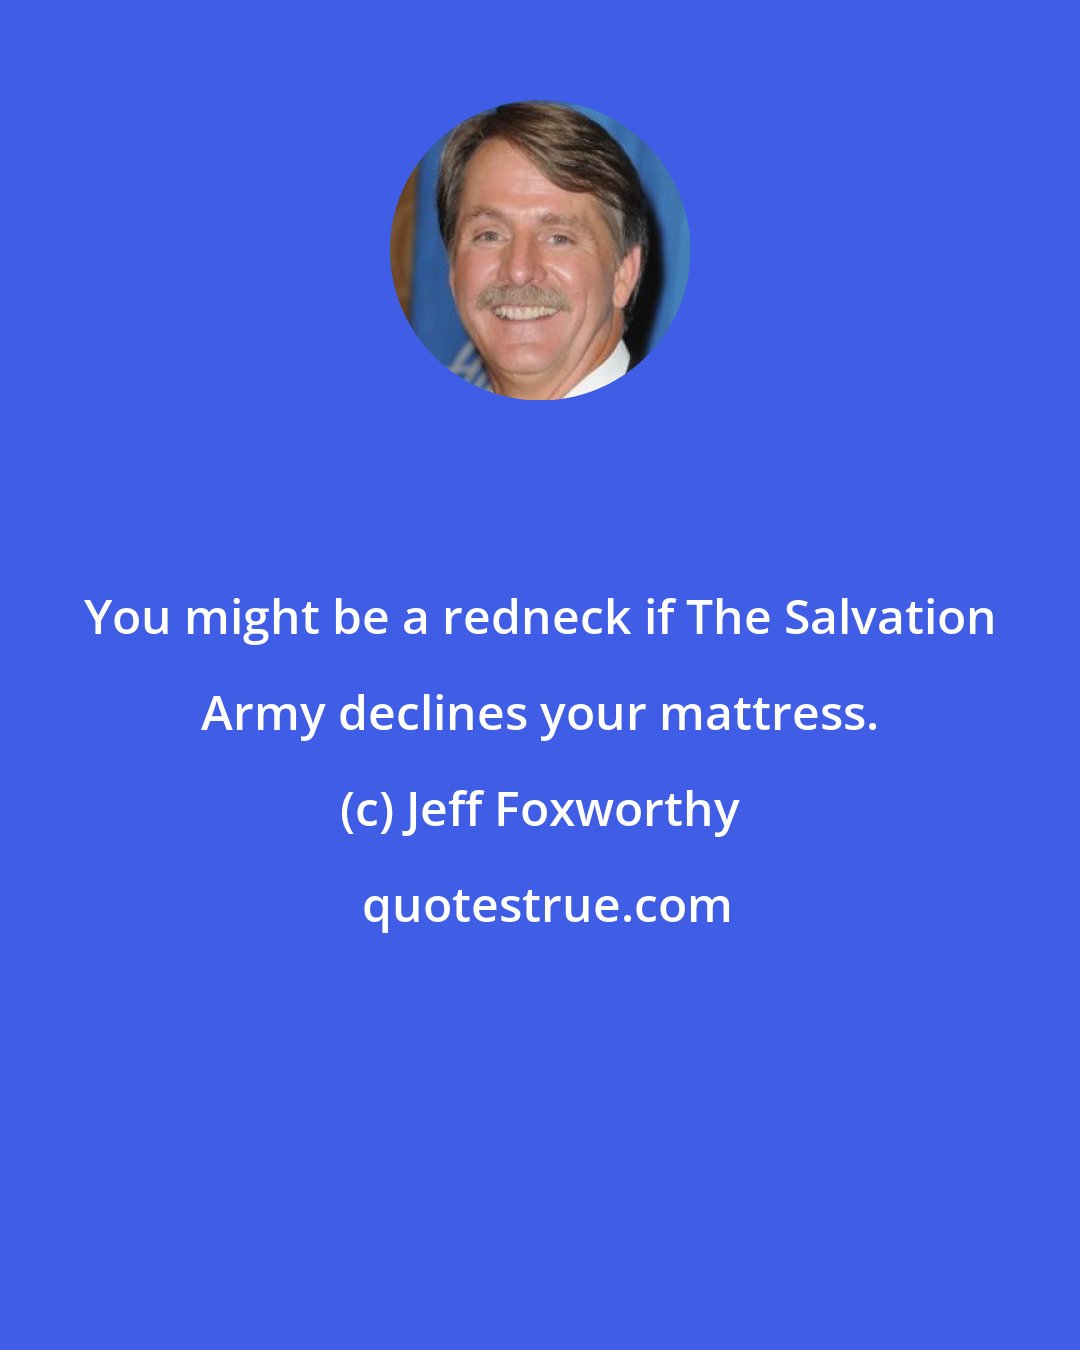 Jeff Foxworthy: You might be a redneck if The Salvation Army declines your mattress.